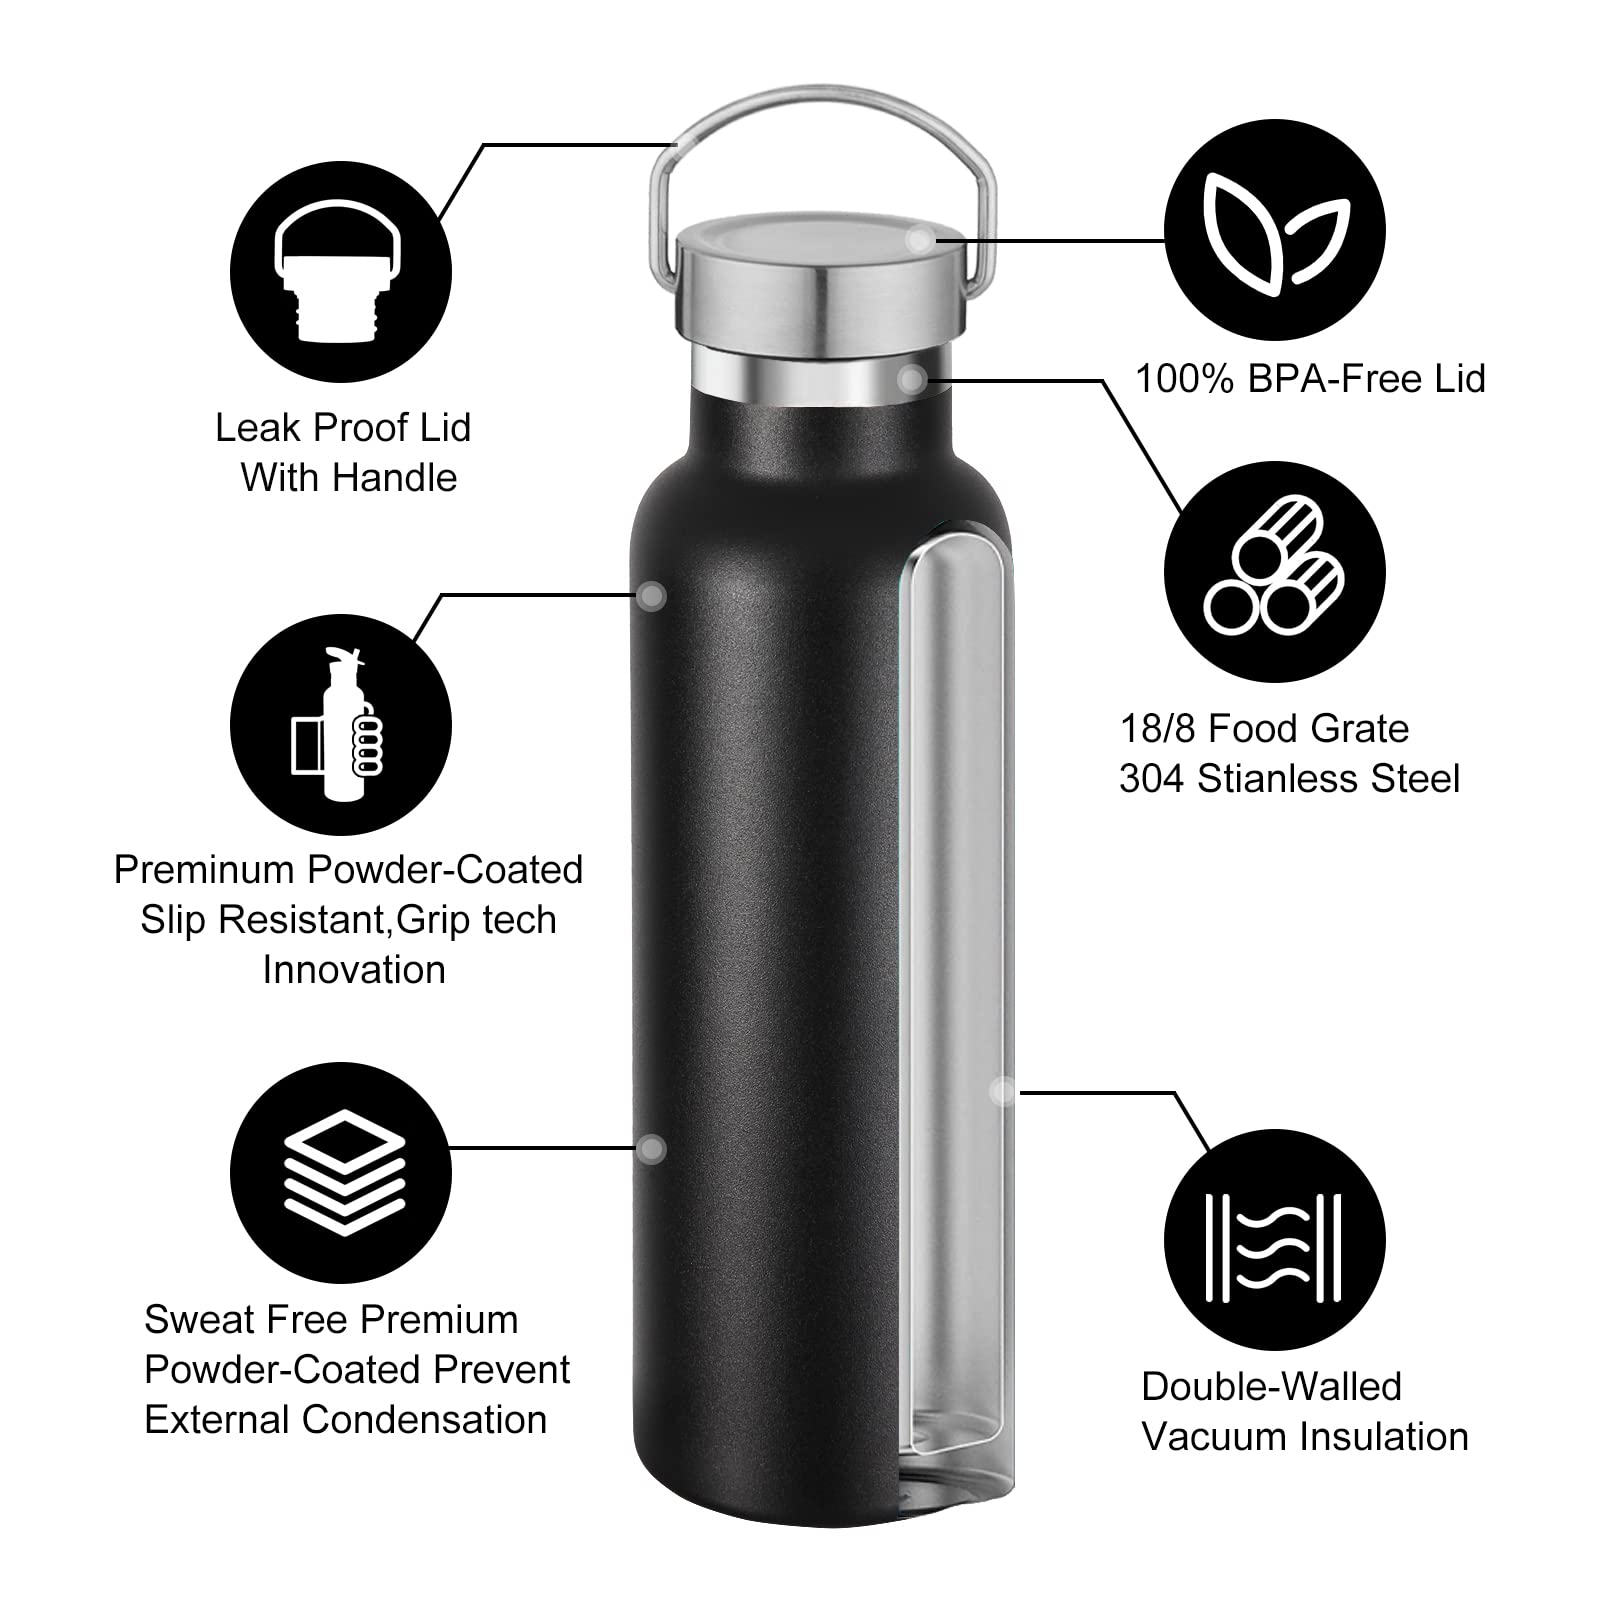 Neihepal Black Stainless Steel Water Bottles,20 Ounce Vacuum Insulated Double Wall Travel Bottle with Leak Proof Lid of Handle,Metal Reusable Standard Mouth Flask Thermoses for School,Hikers,Gift